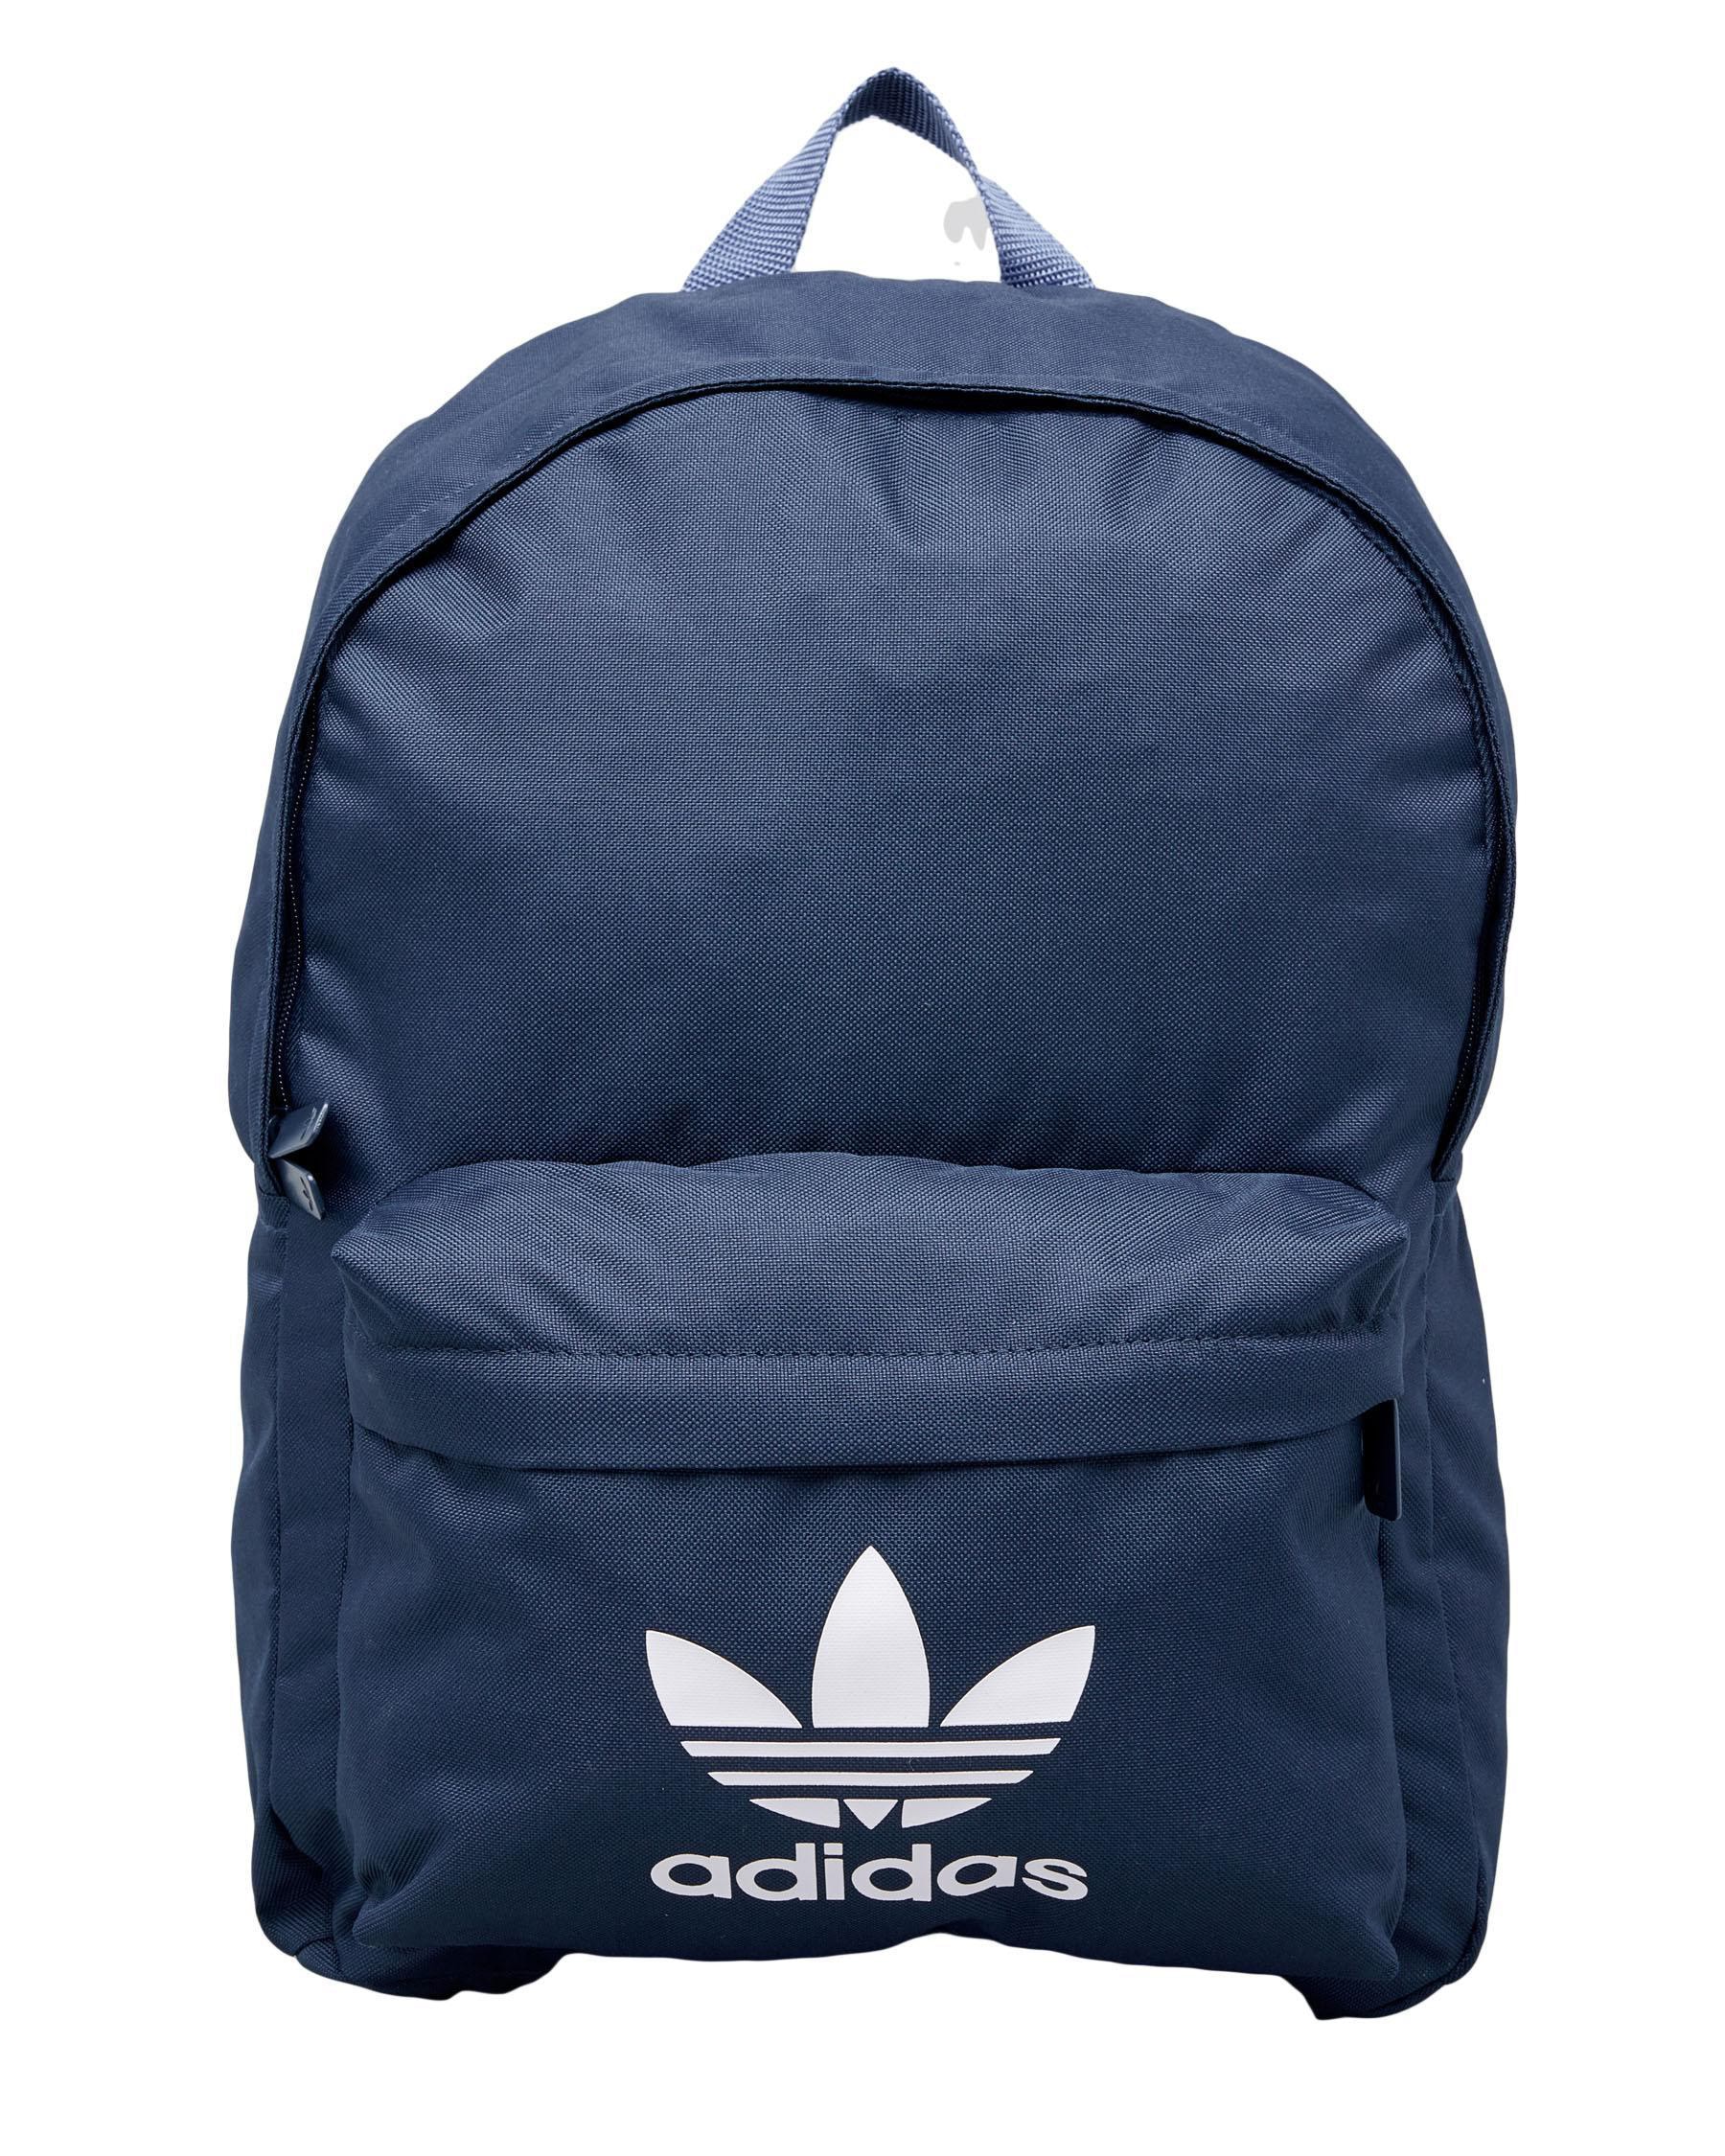 Adidas Classic Backpack In Crew Navy - Fast Shipping & Easy Returns ...